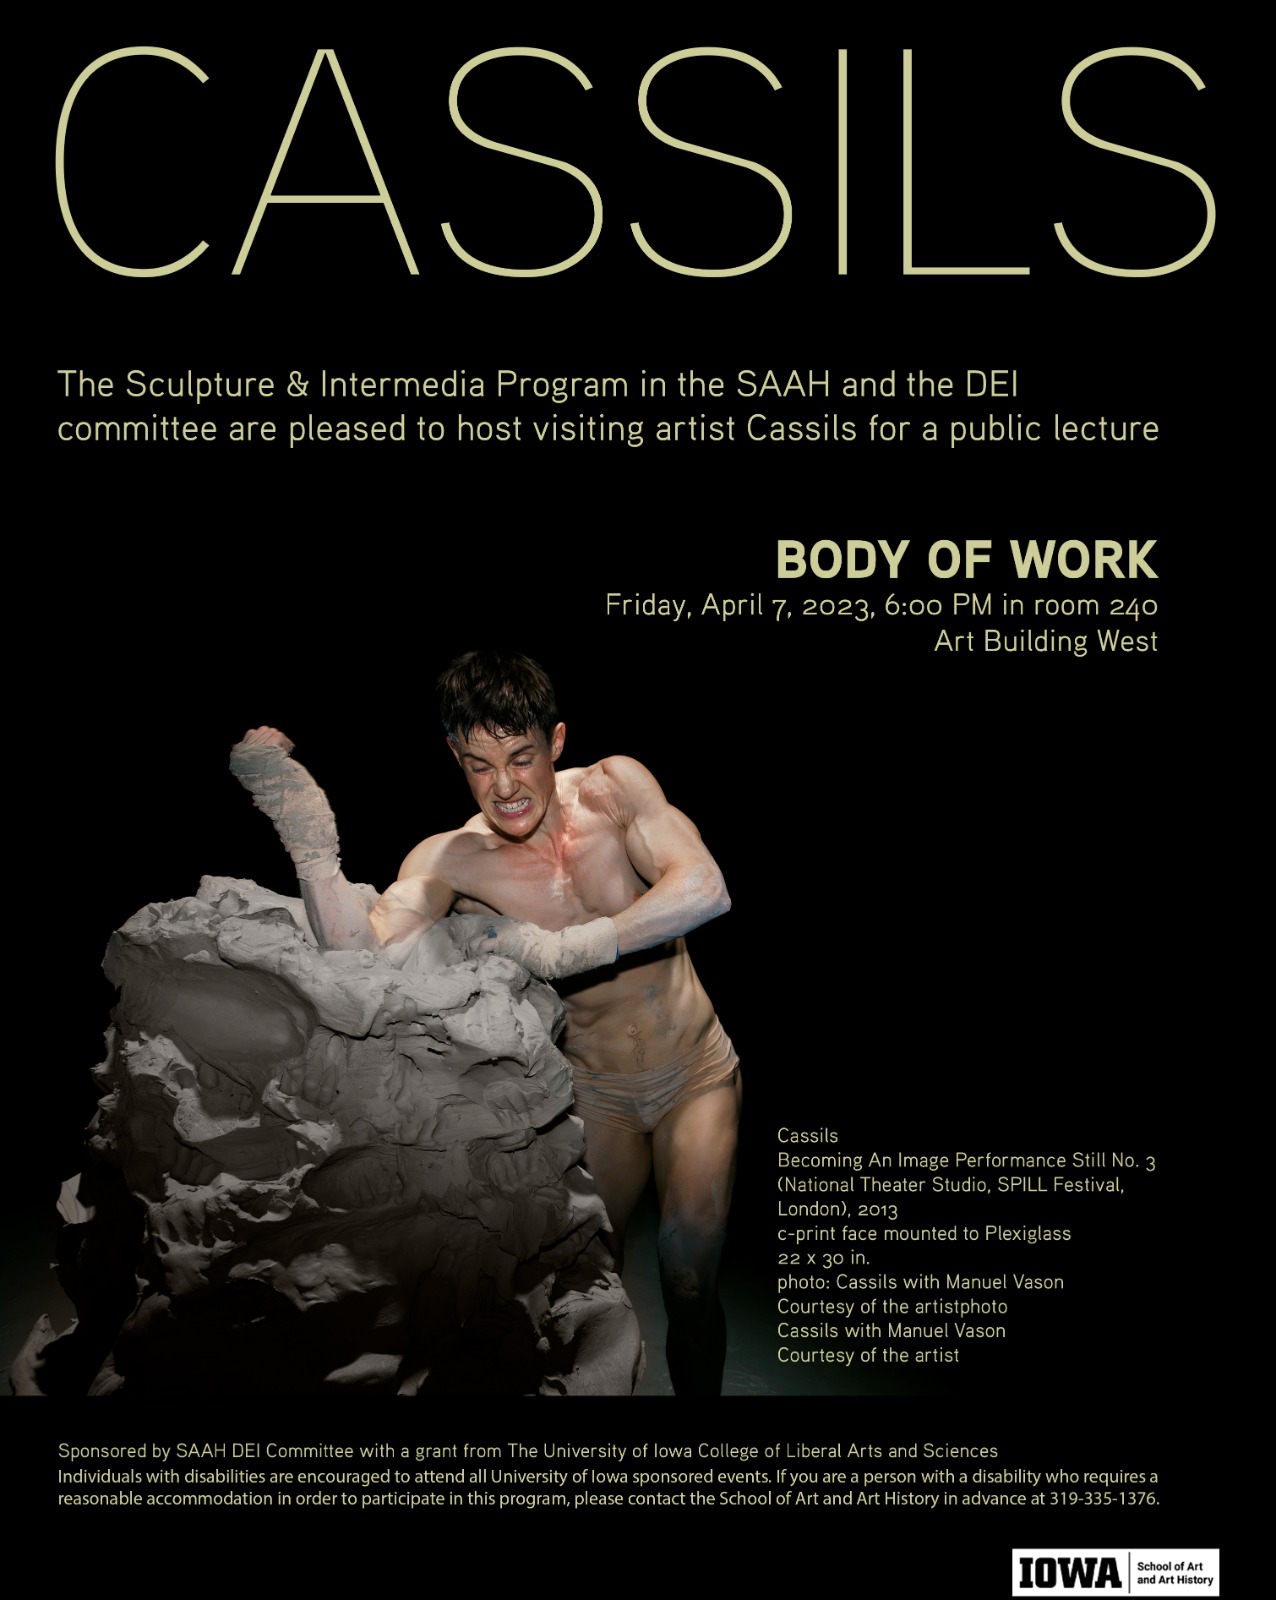 Body of Work - Cassils DEI Visiting Artist Sculpture and Intermedia Friday April 7, 2023 6:00 PM 240 Art Building West